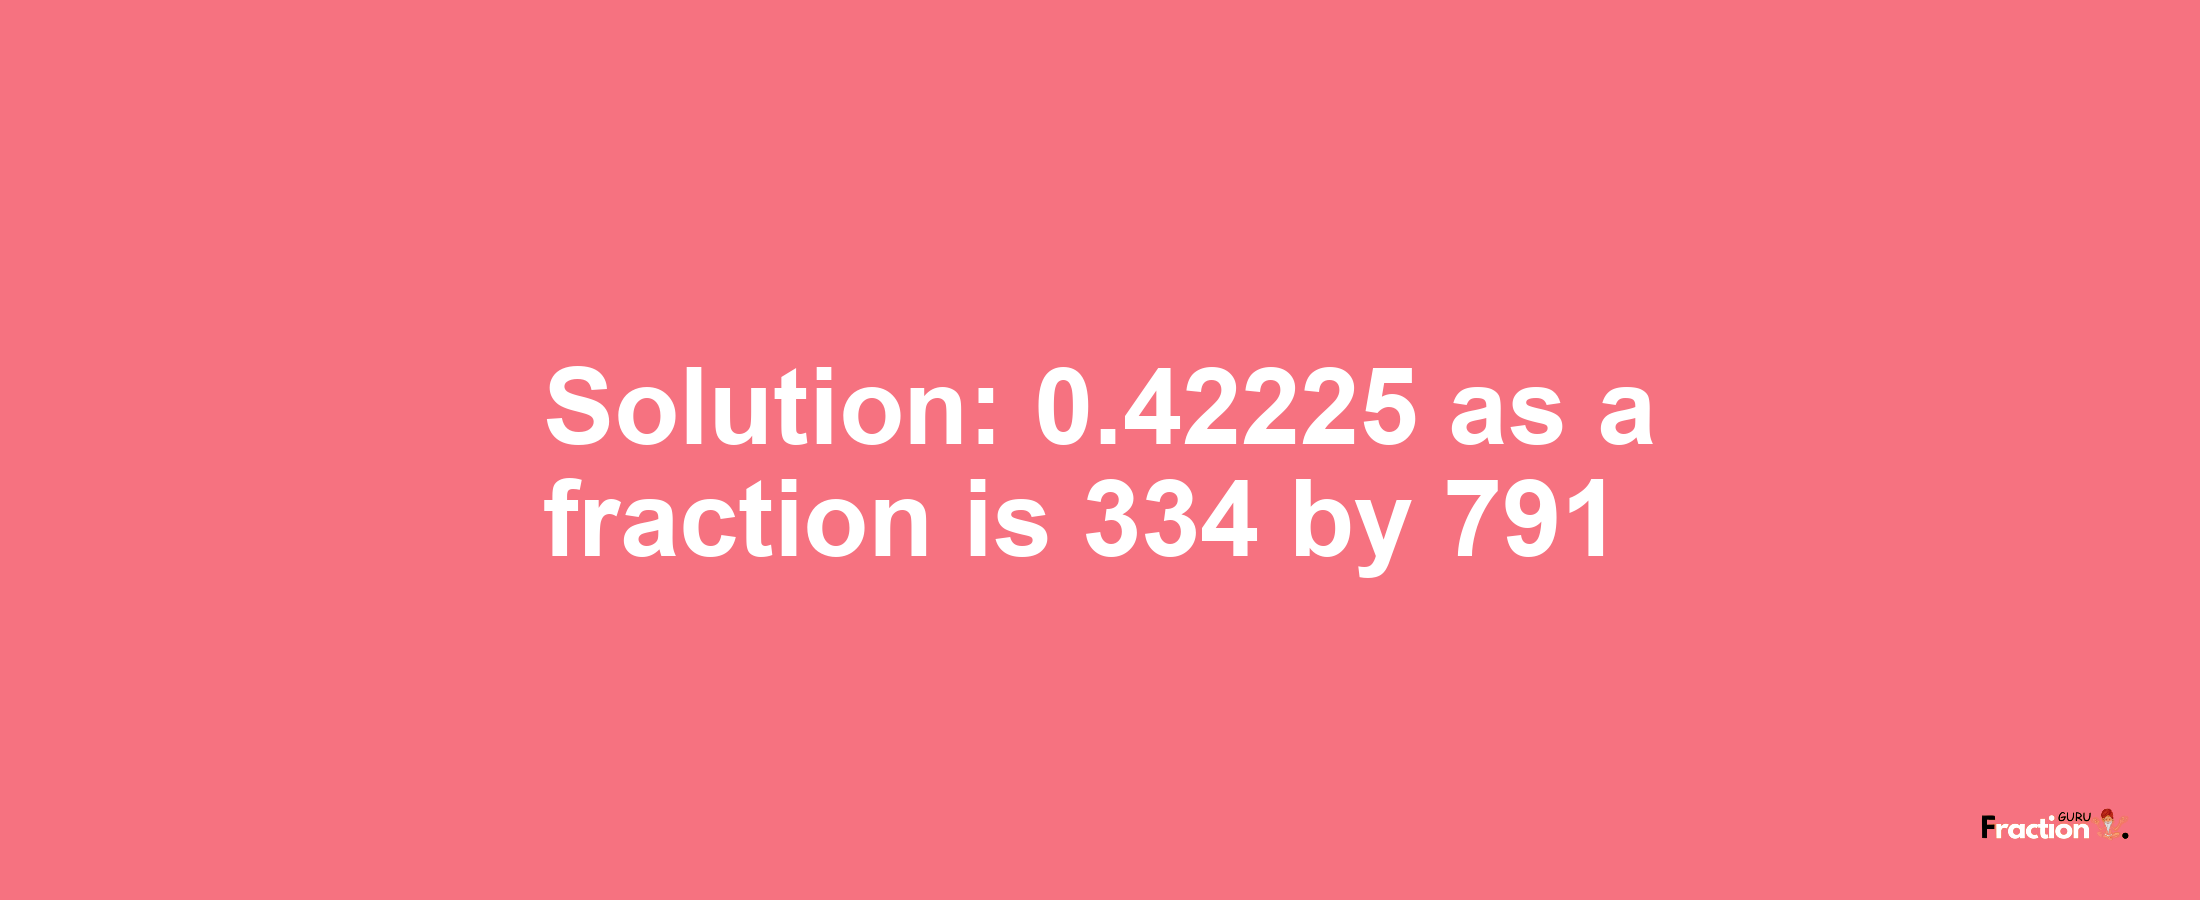 Solution:0.42225 as a fraction is 334/791